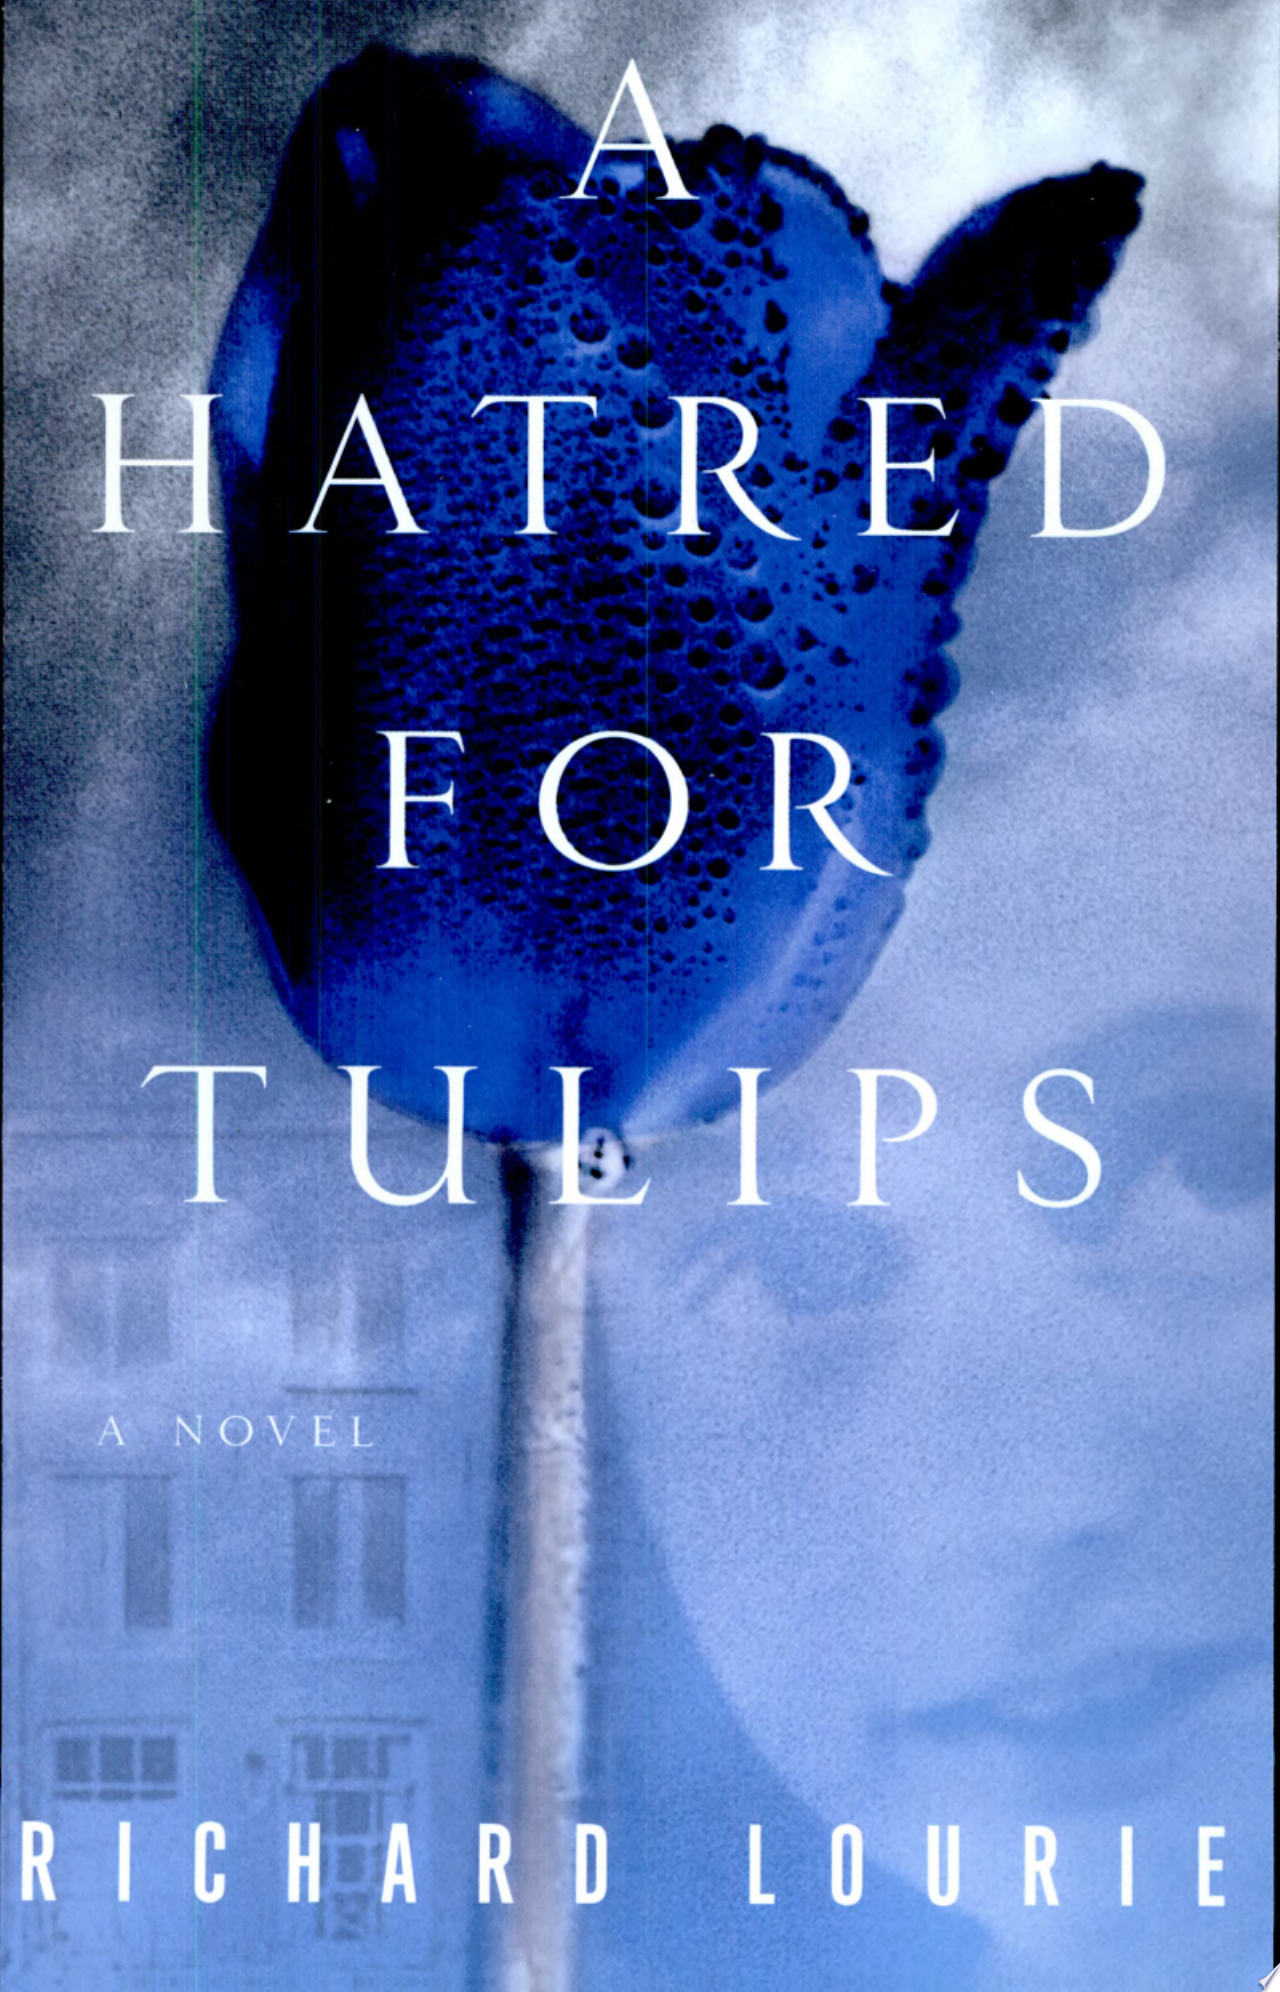 Image for "A Hatred for Tulips"